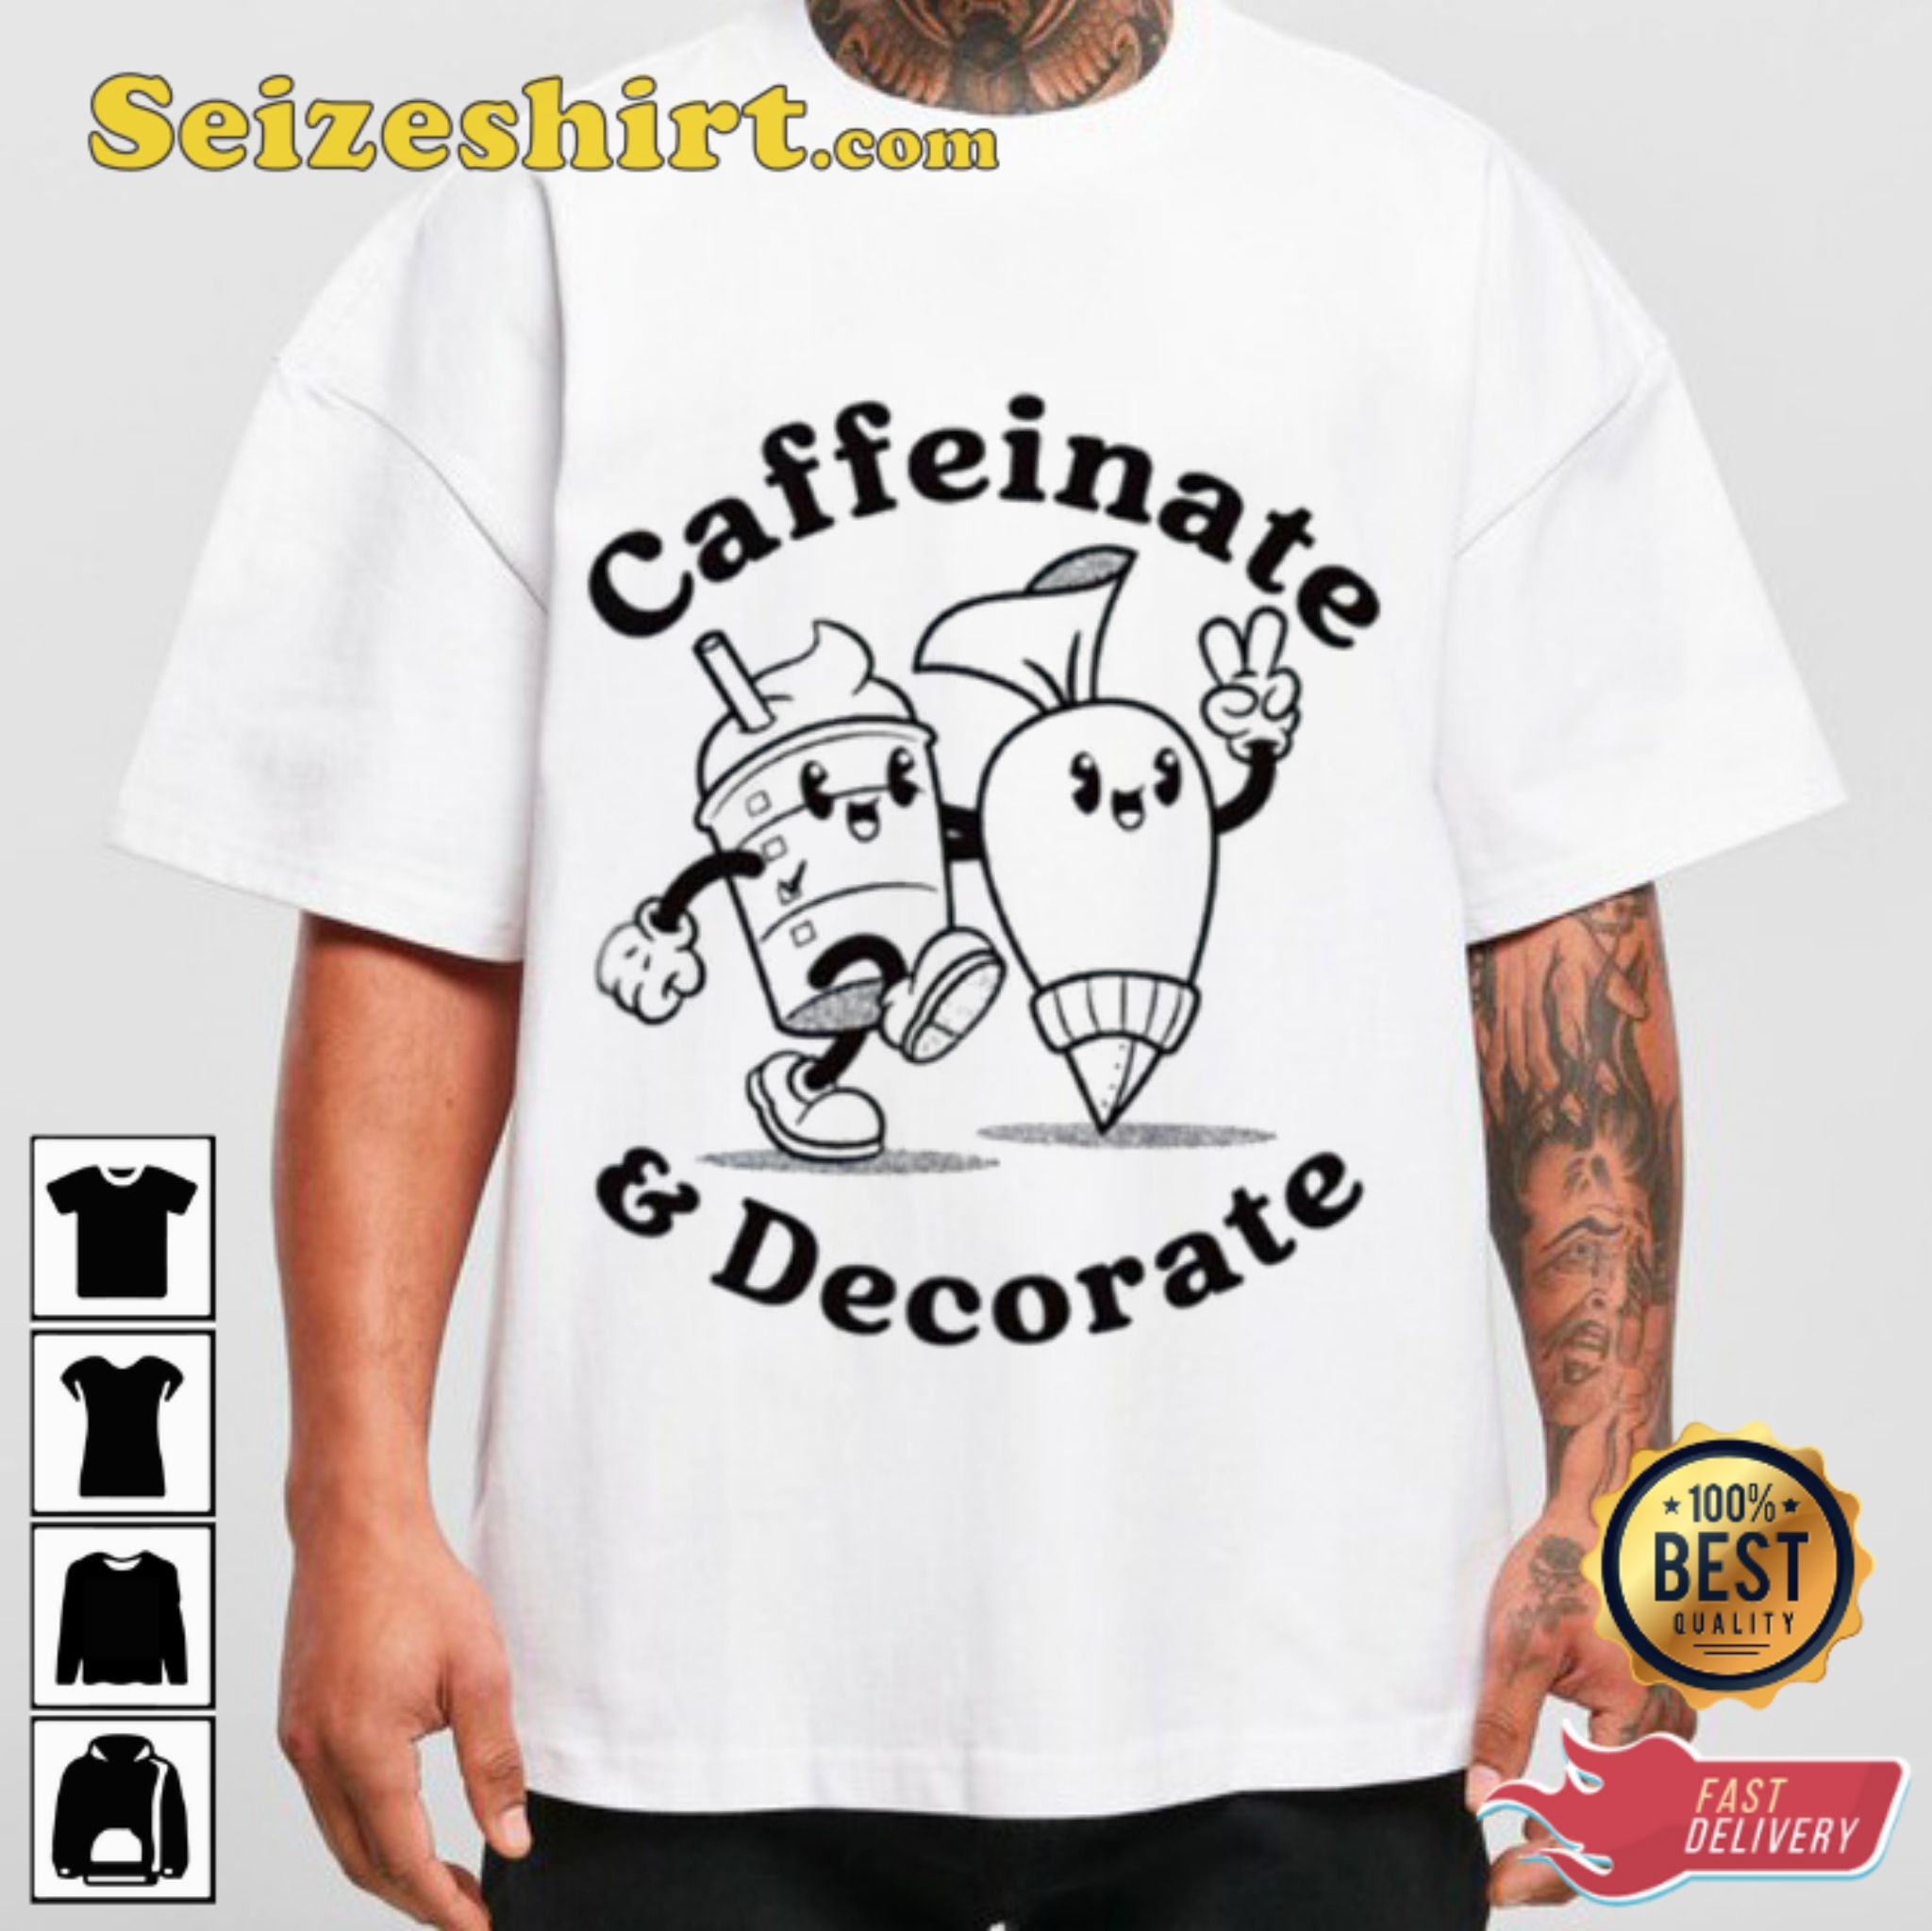 Caffeinate And Decorate Lifestyle Theme T-Shirt